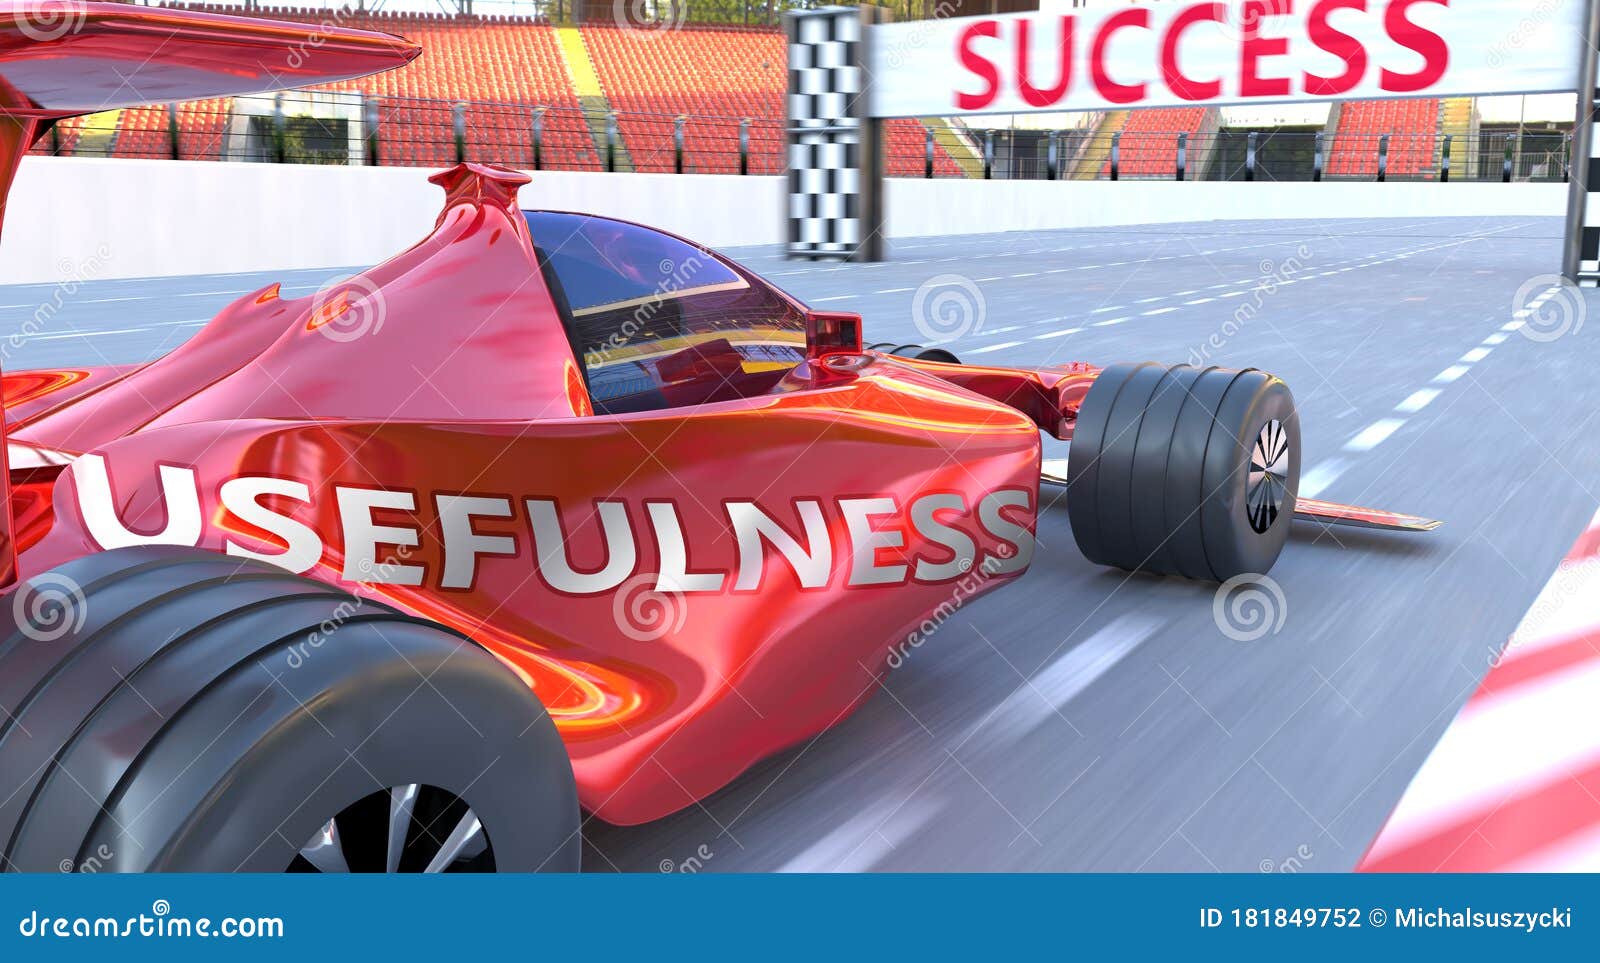 usefulness and success - pictured as word usefulness and a f1 car, to ize that usefulness can help achieving success and